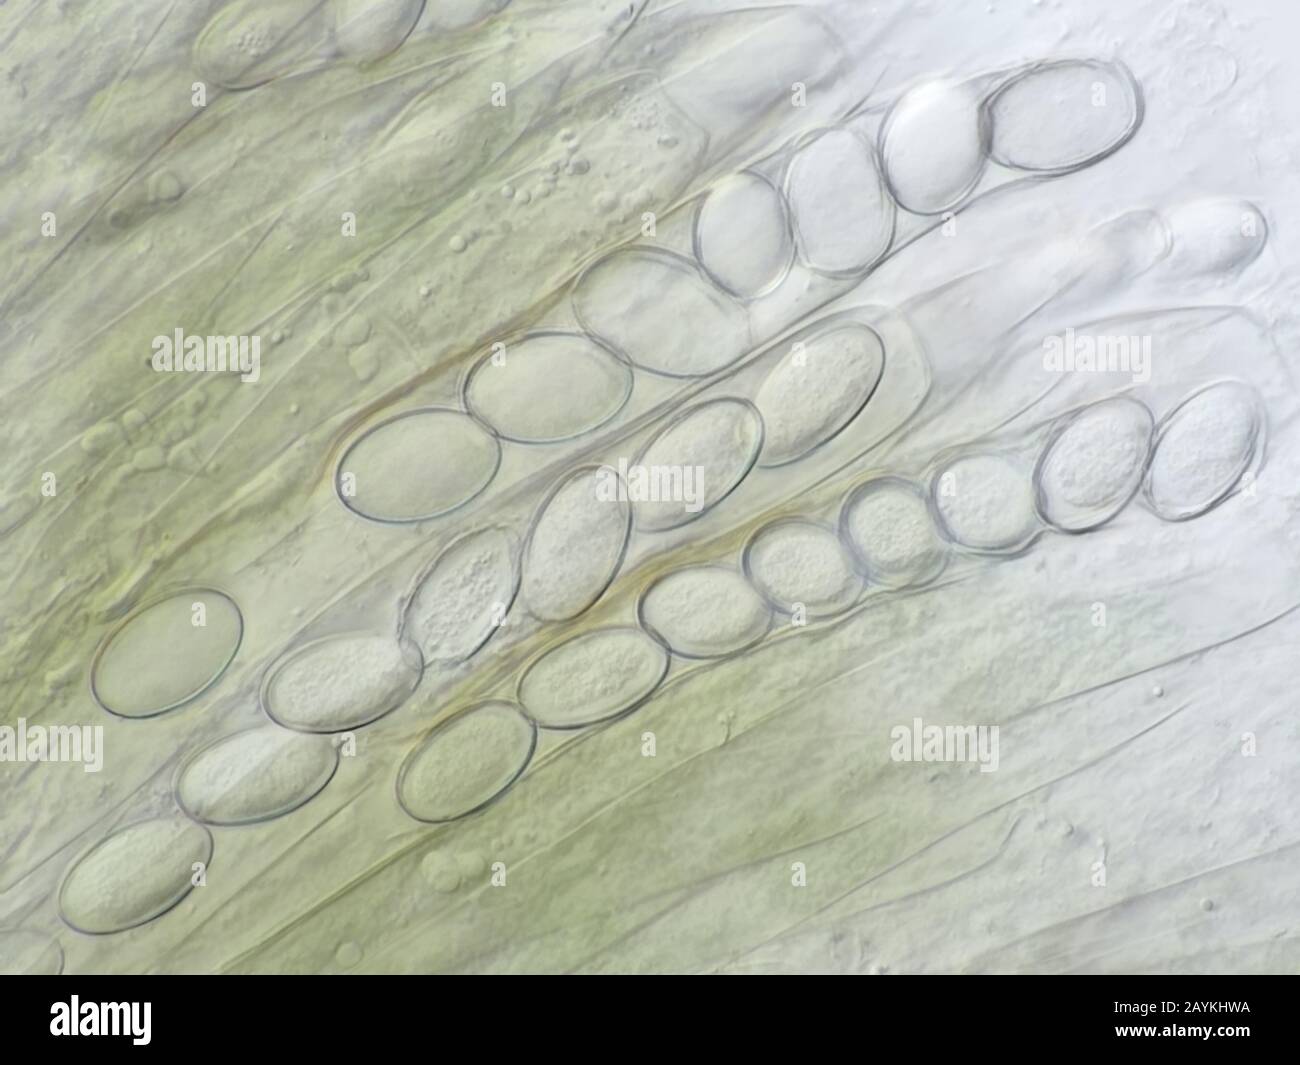 Several asci (spore-bearing cells of ascomycete fungi) from dirty water, pictured using 100x oil microscope objective Stock Photo